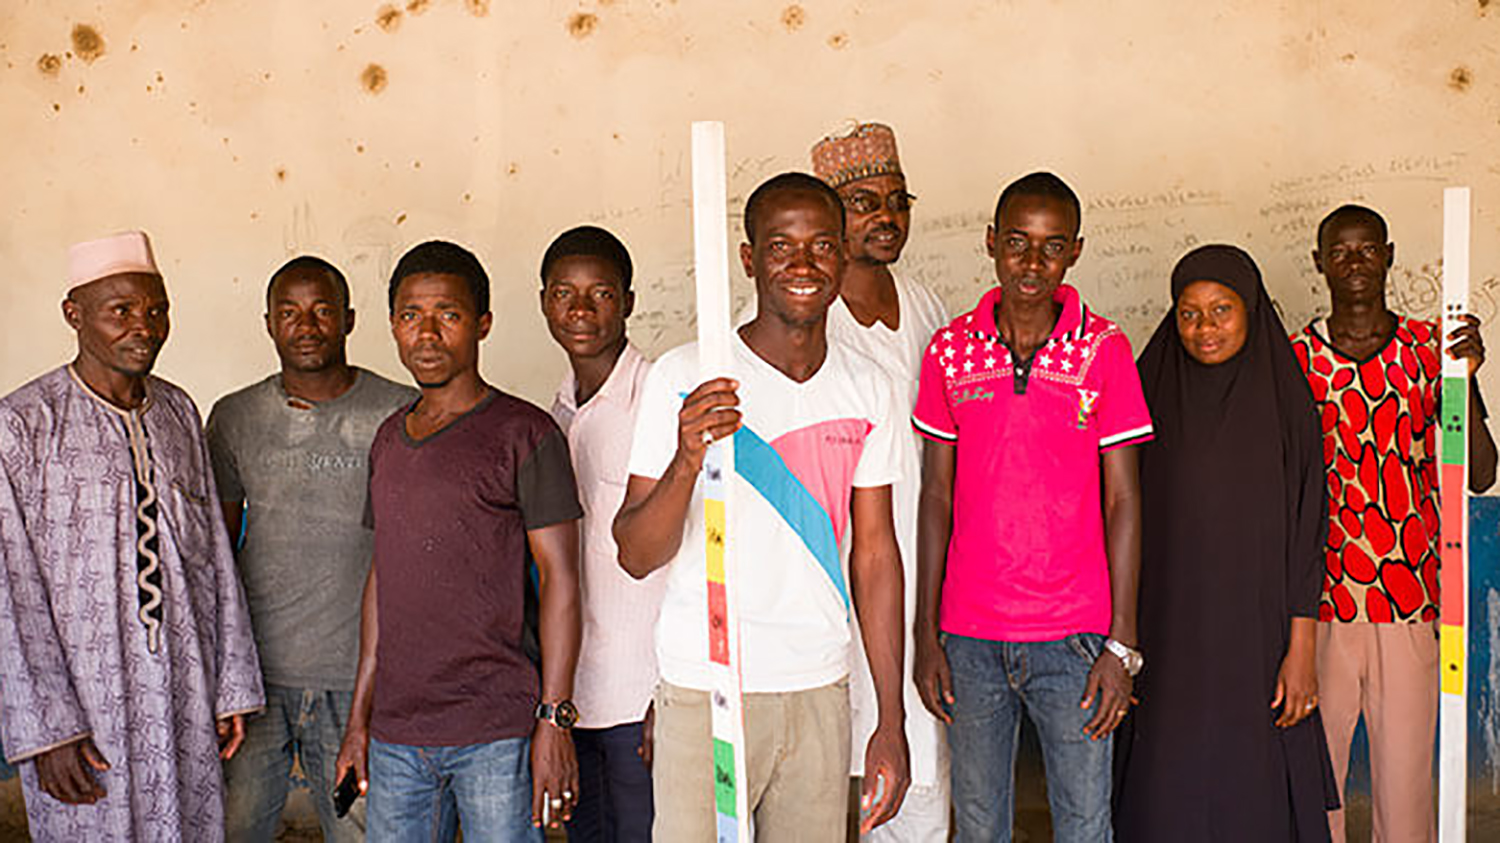 A group of healthworkers stand smiling indoors. One man in the middle holds a measuring stick used for measuring height to allocate the right amount of medication.